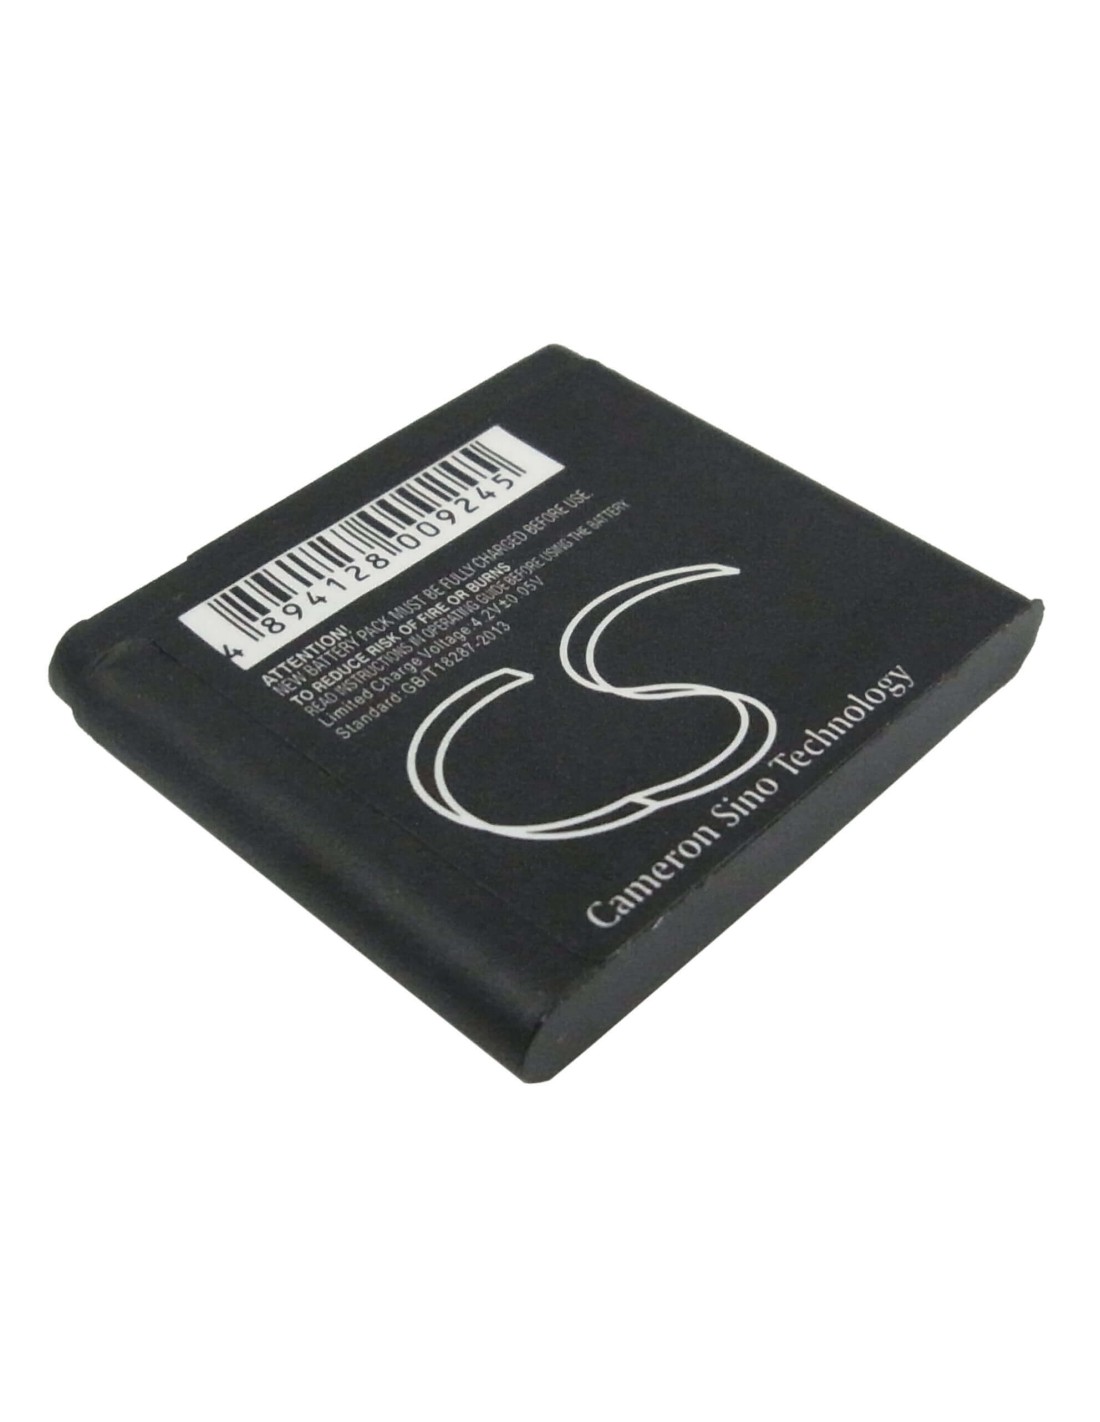 Battery for Nokia 8800, 8801, 8800 Sirocco 3.7V, 550mAh - 2.04Wh